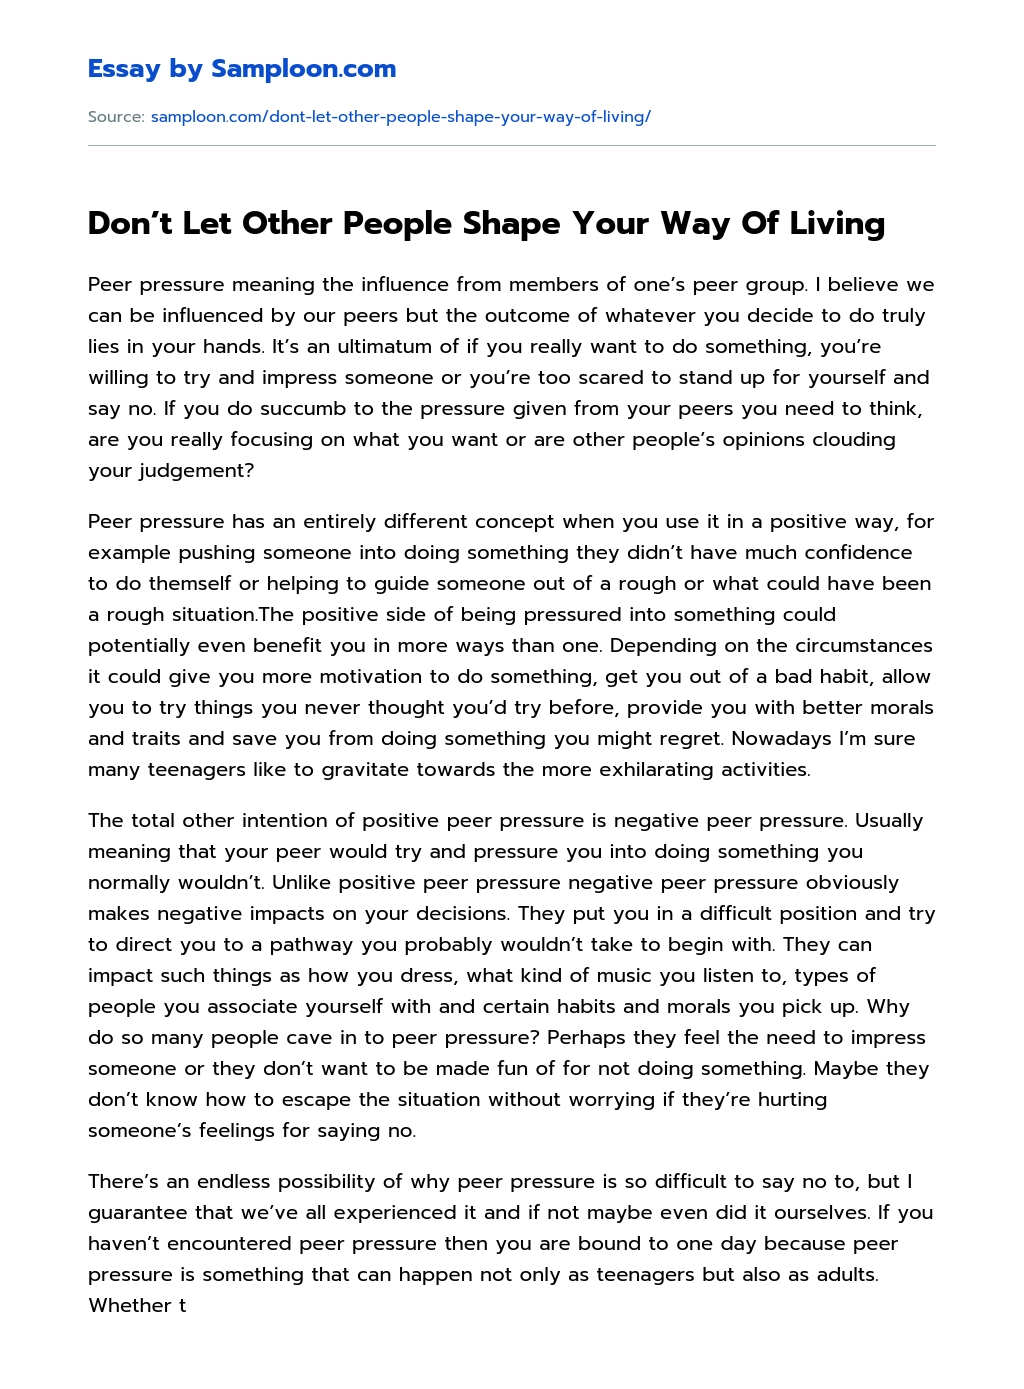 Don’t Let Other People Shape Your Way Of Living essay